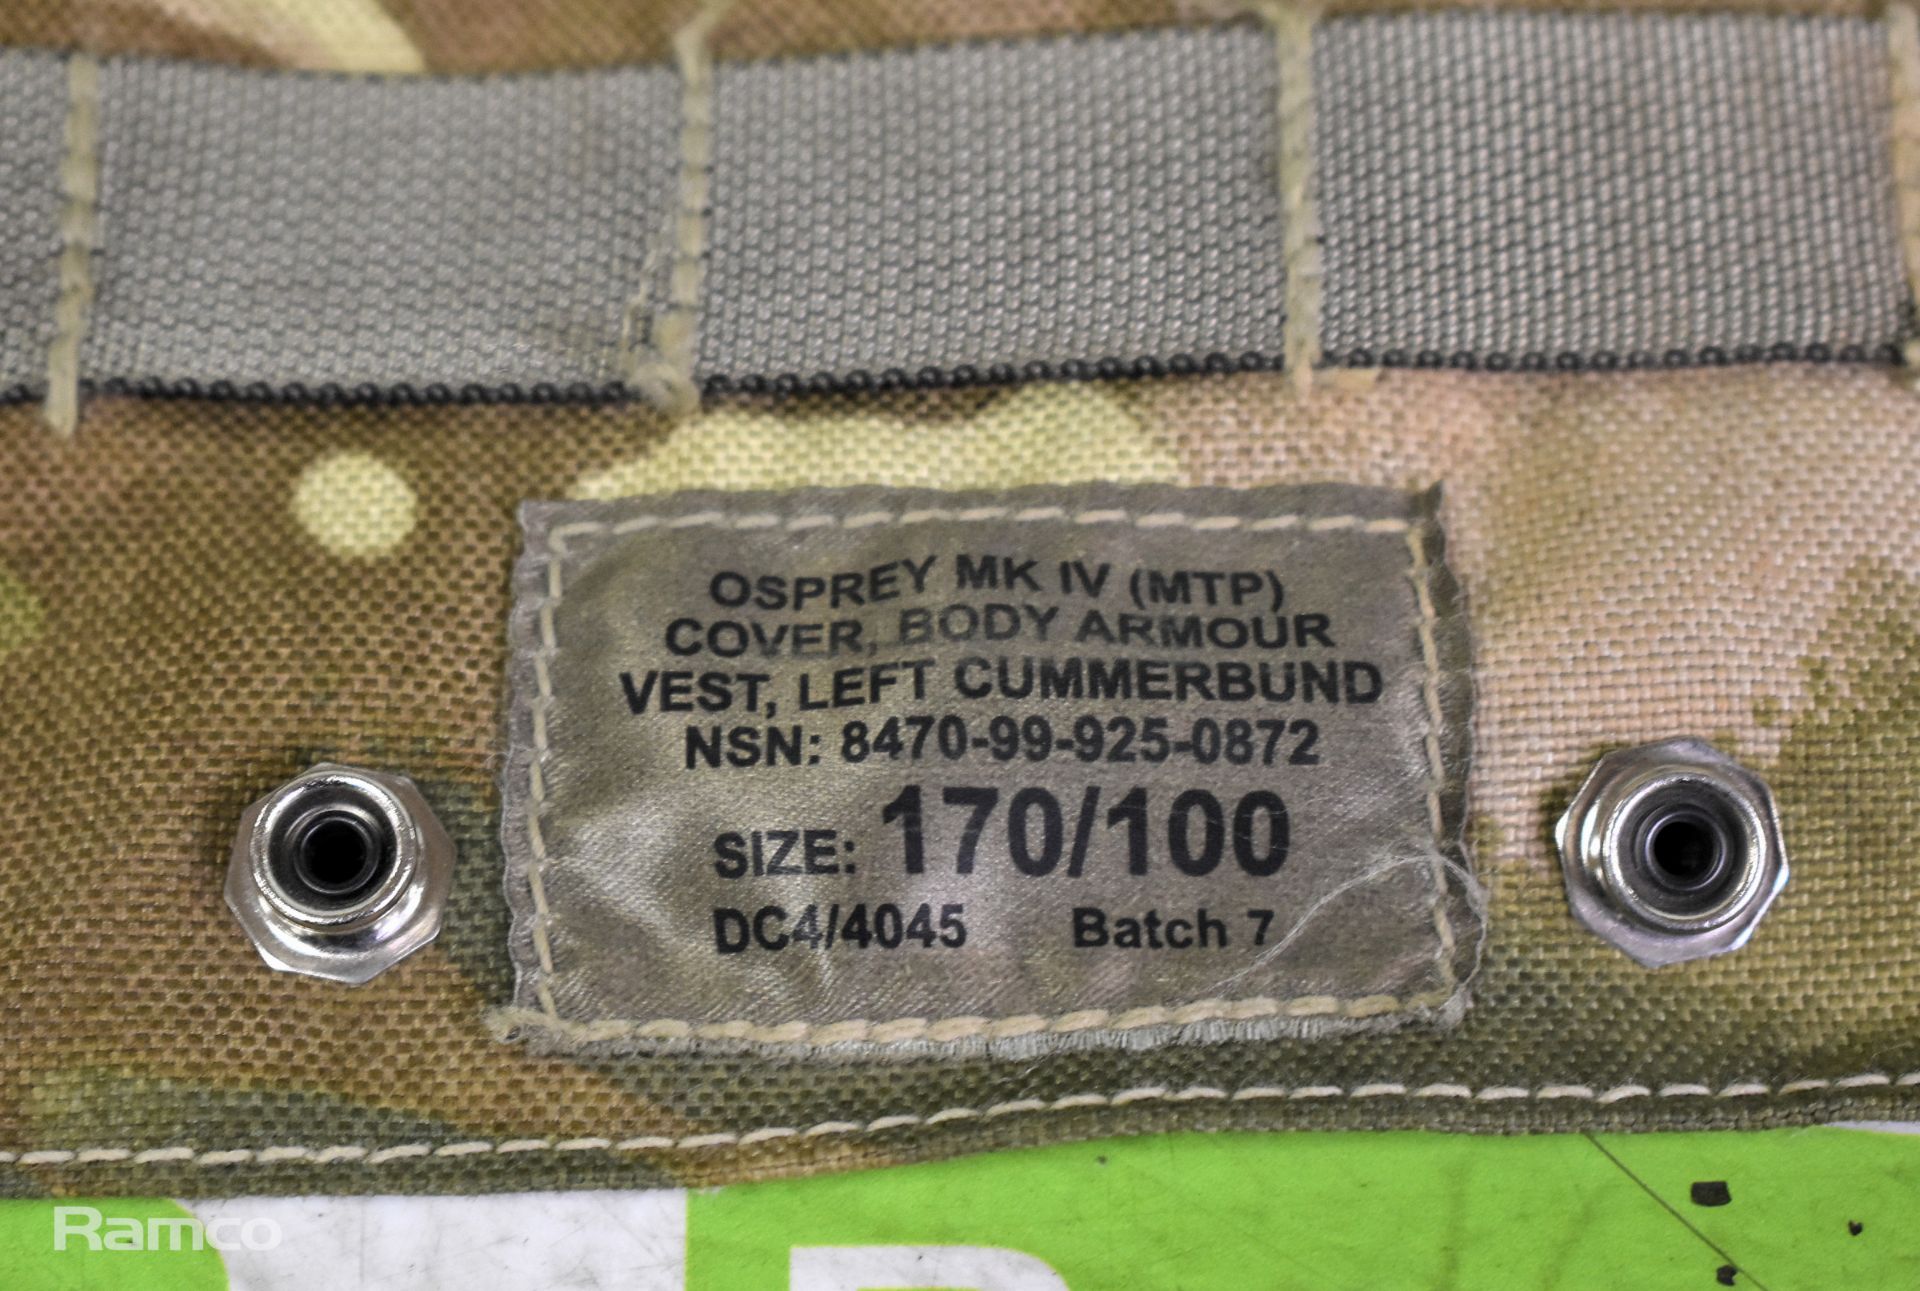 British Army body covers & ammunition pouches - see description for details - Image 9 of 16